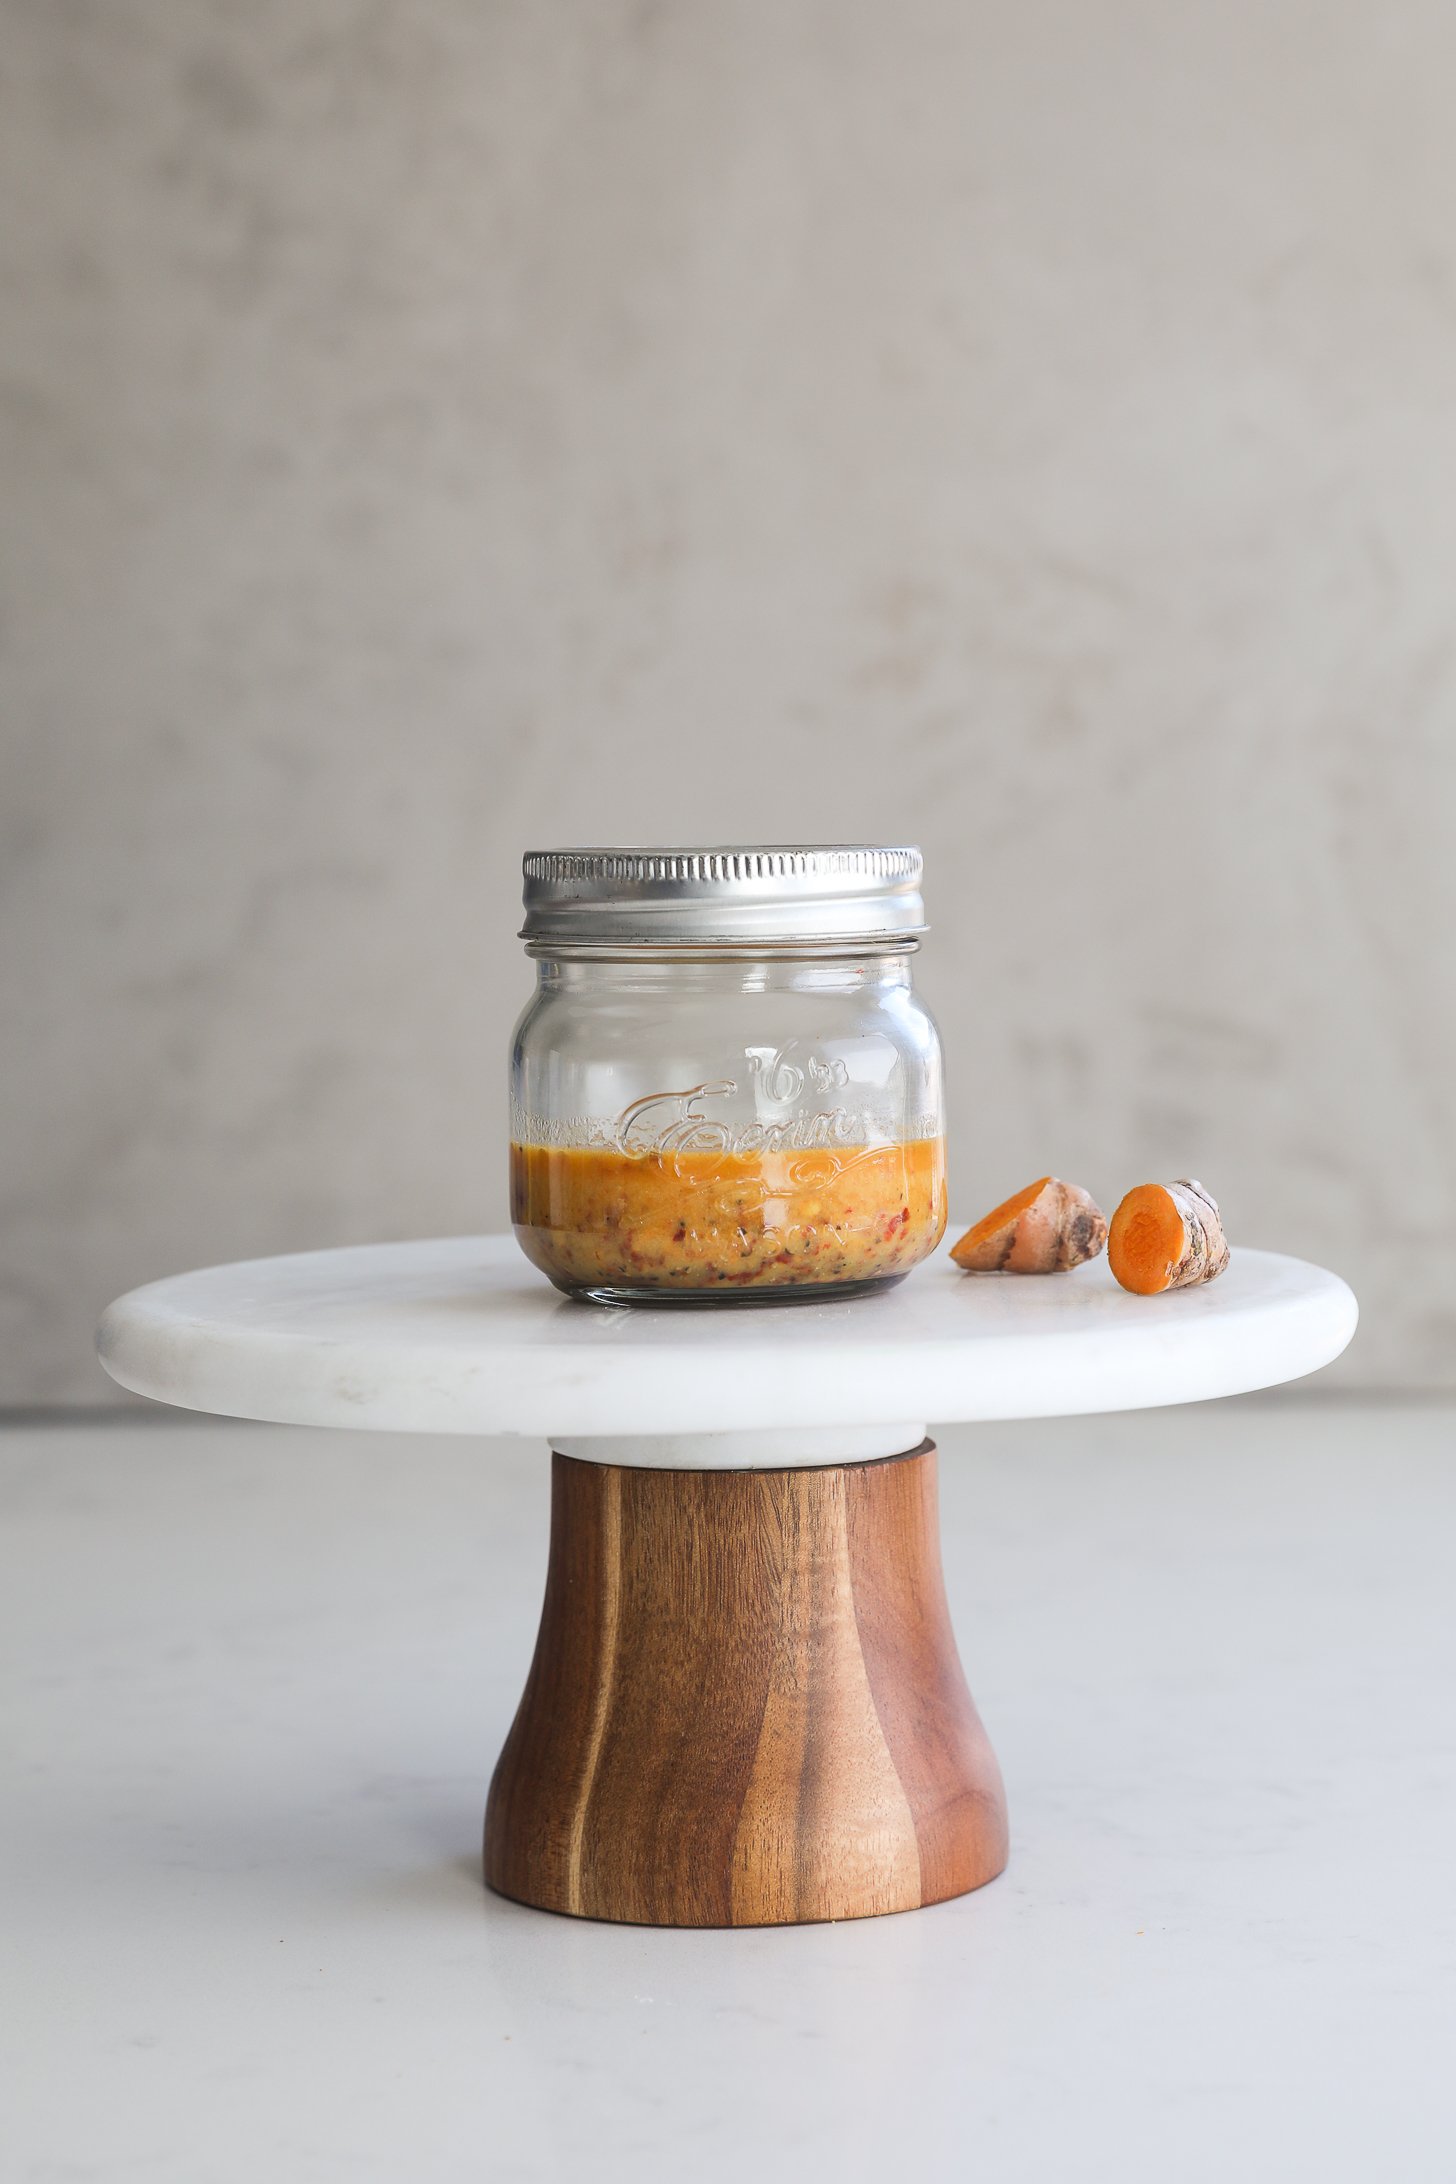 Small mason jar of orange-colored dressing placed on a white stand.